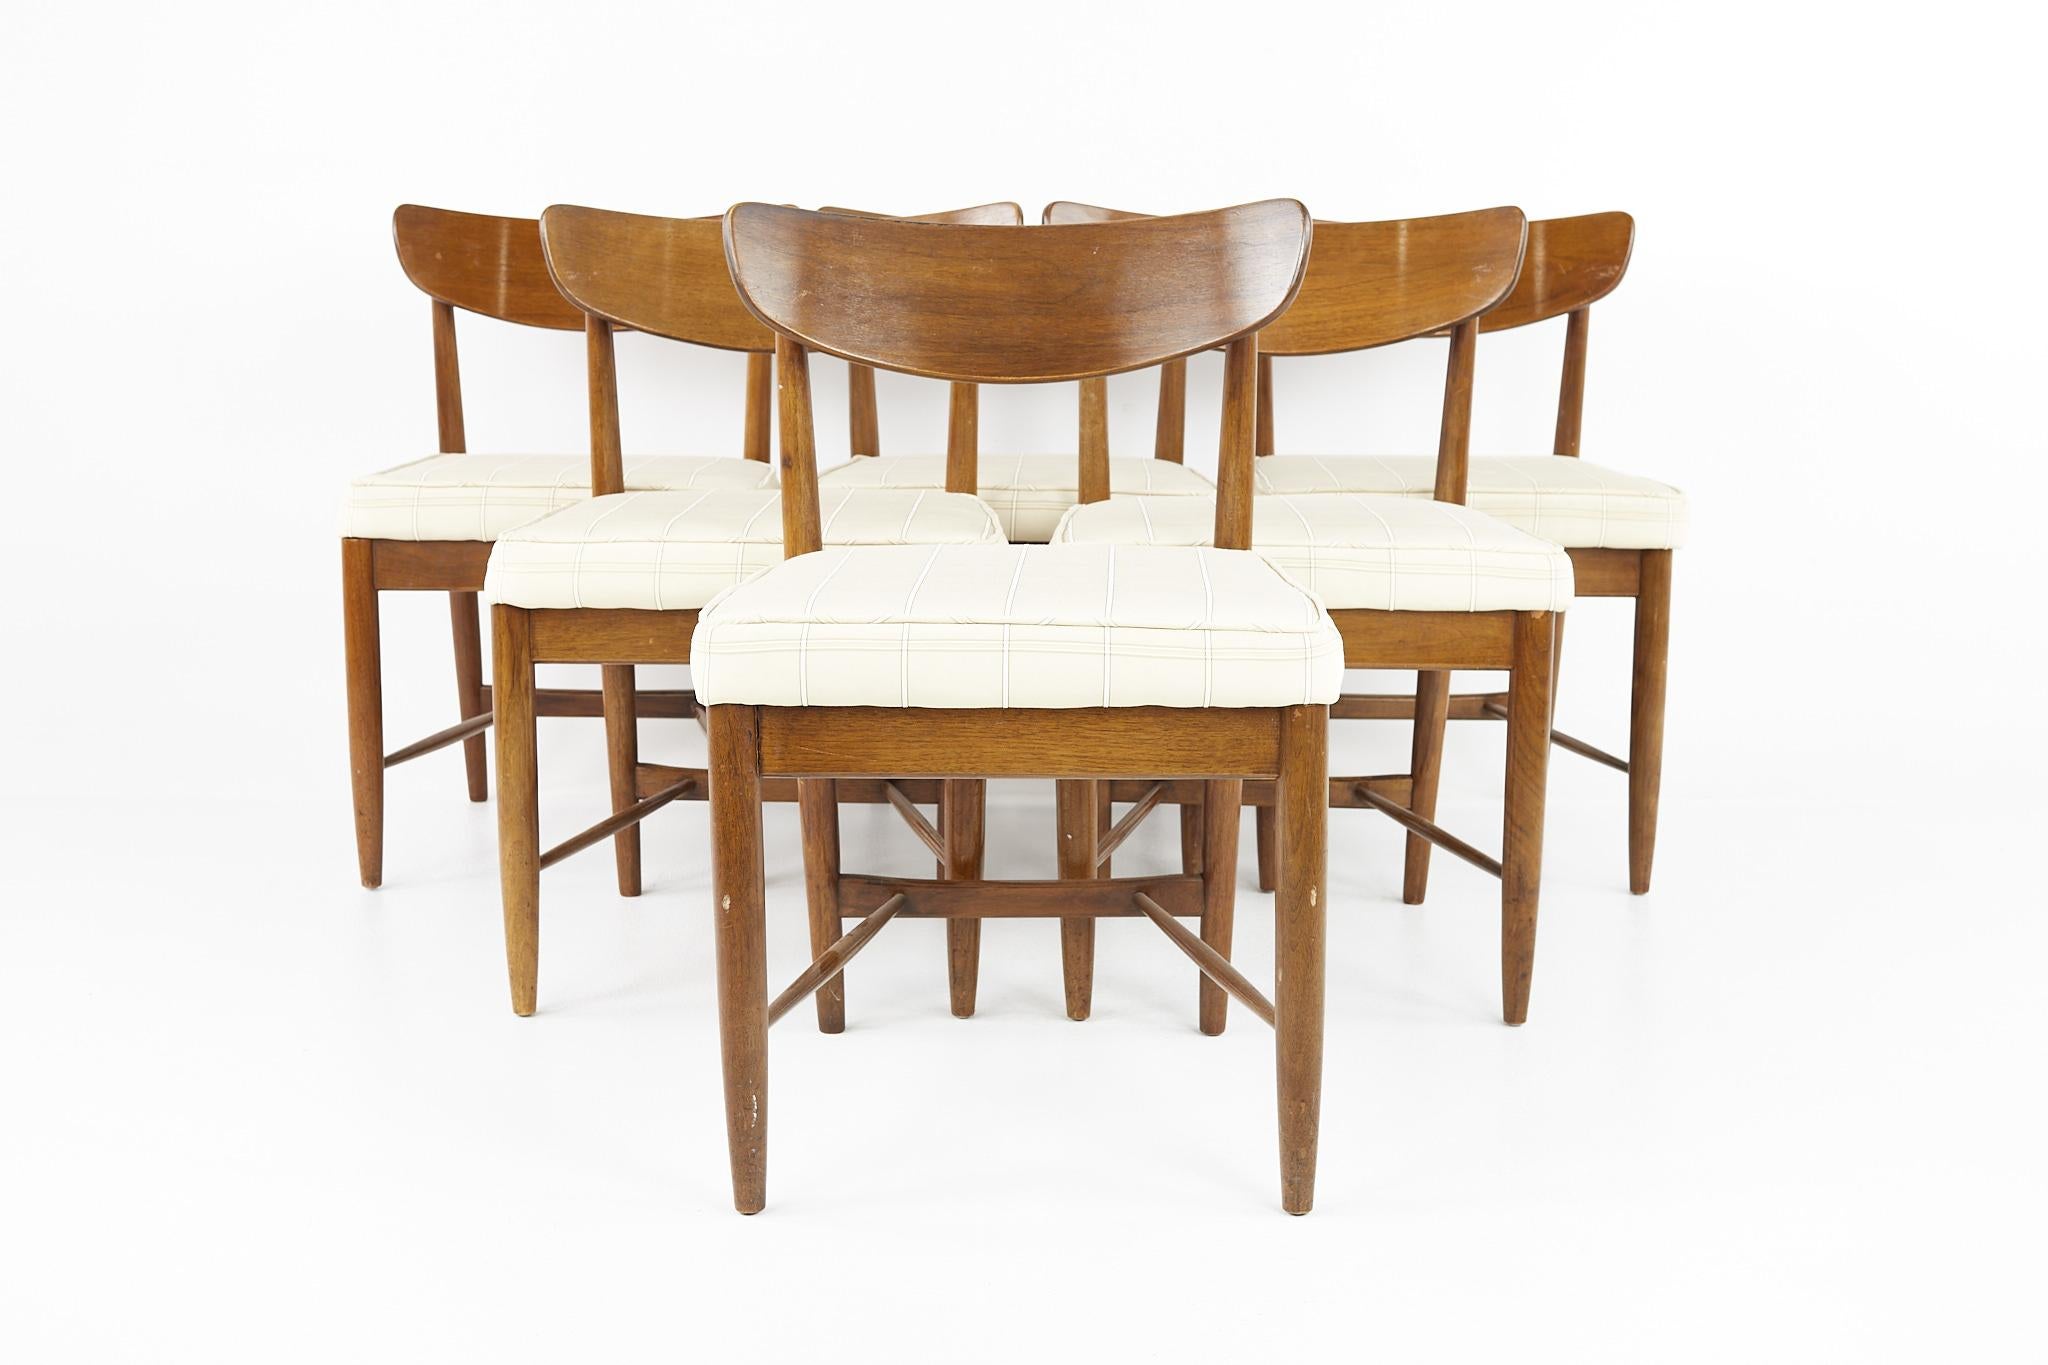 American of Martinsville Dania mid century walnut dining chairs - set of 6

Each of these chairs measure: 21 wide x 20 deep x 32 inches high, with a seat height of 19 inches

?All pieces of furniture can be had in what we call restored vintage